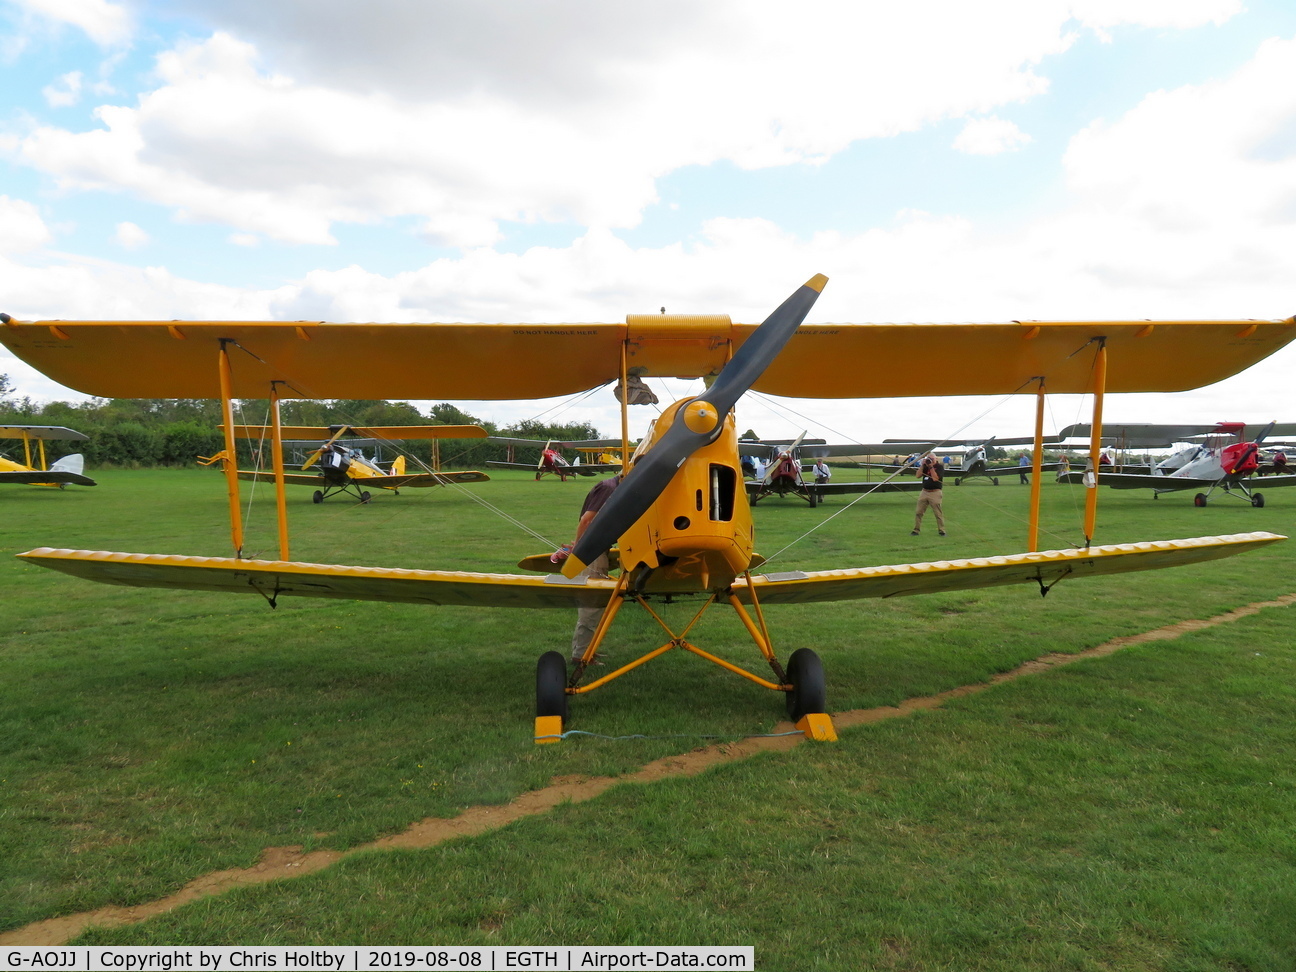 G-AOJJ, 1942 De Havilland DH-82A Tiger Moth II C/N 85877, Head on view of the 1942 Tiger Moth at the Old Warden 'Gathering of Moths' 2019